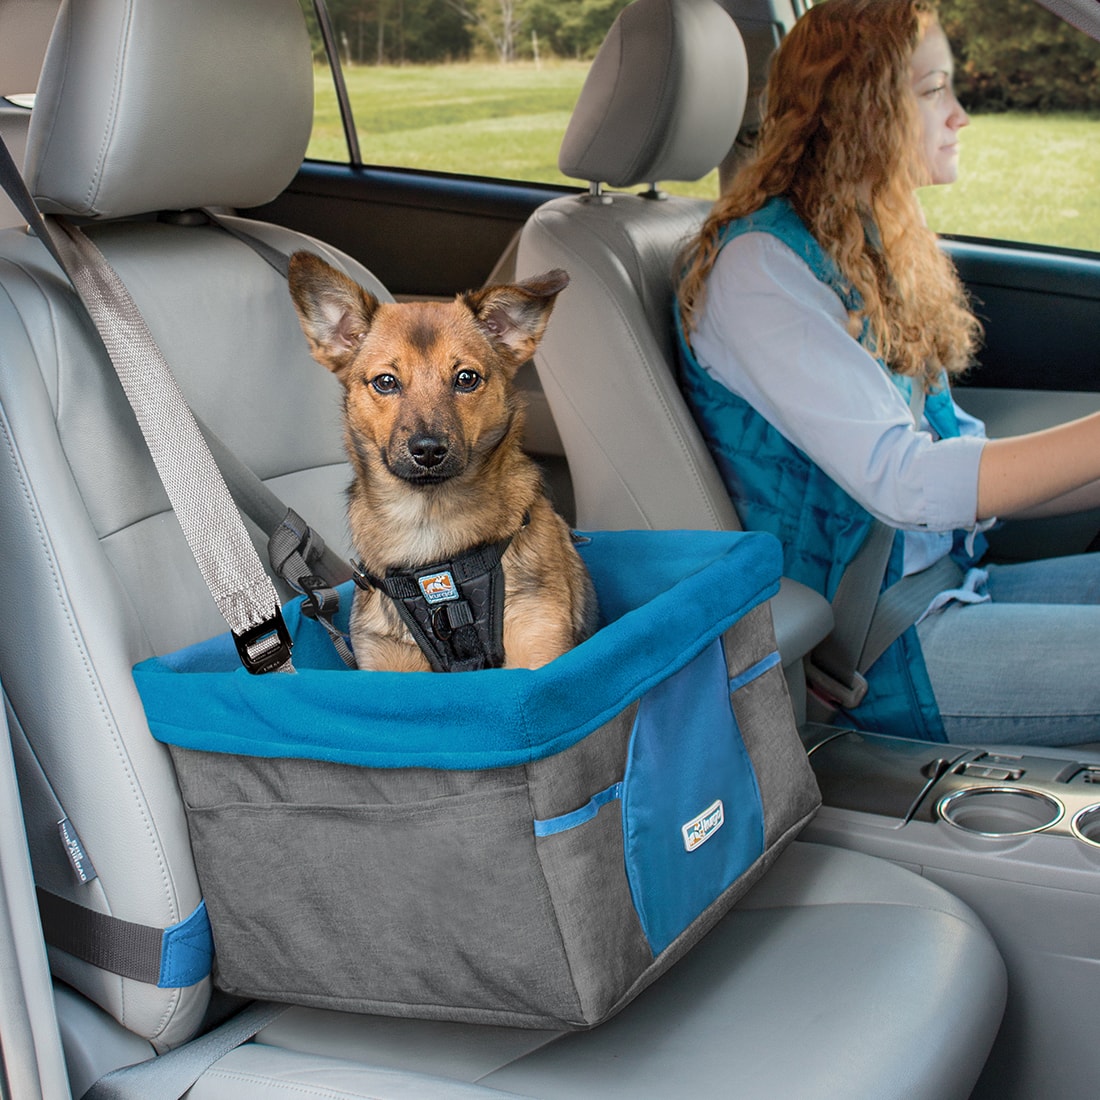 Kurgo Rover Booster Dog Seat, Heather Charcoal